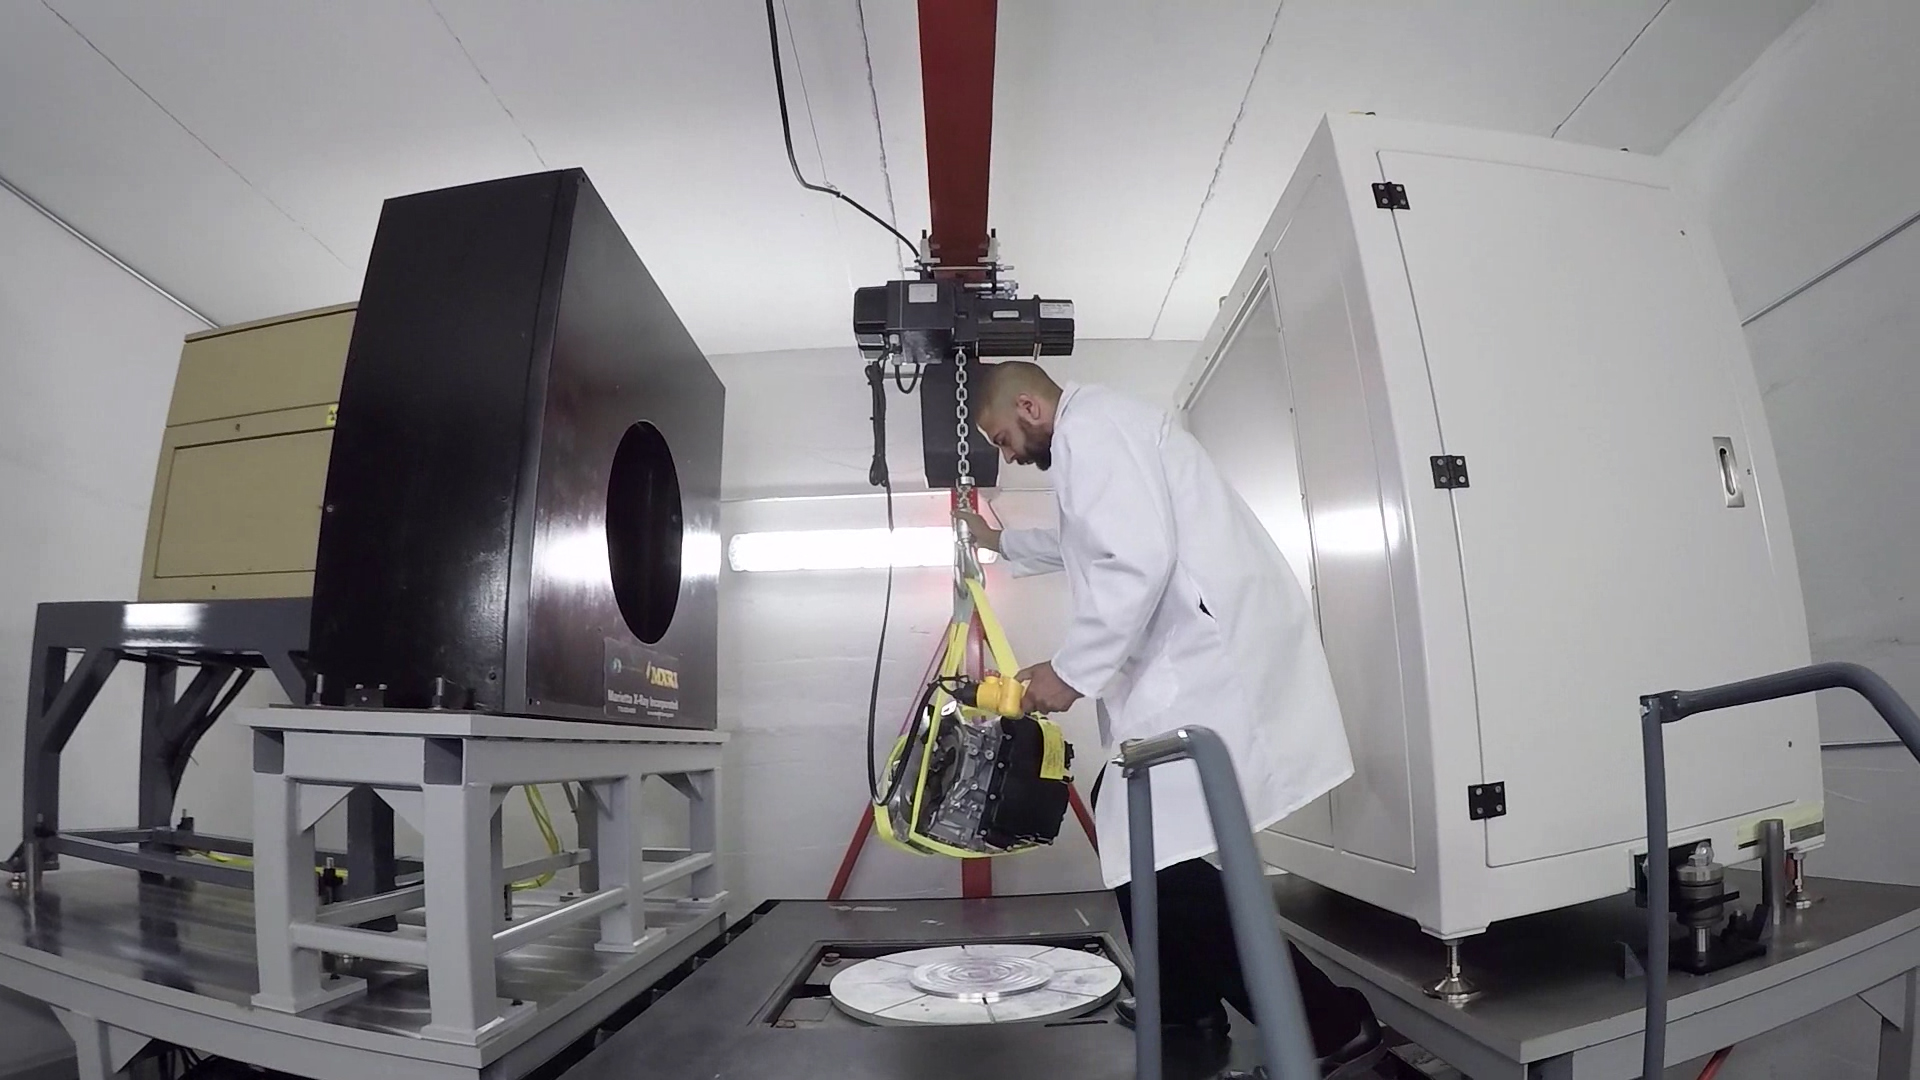 Jesse Garant Metrology Center has launched a new high energy industrial CT scanning service.